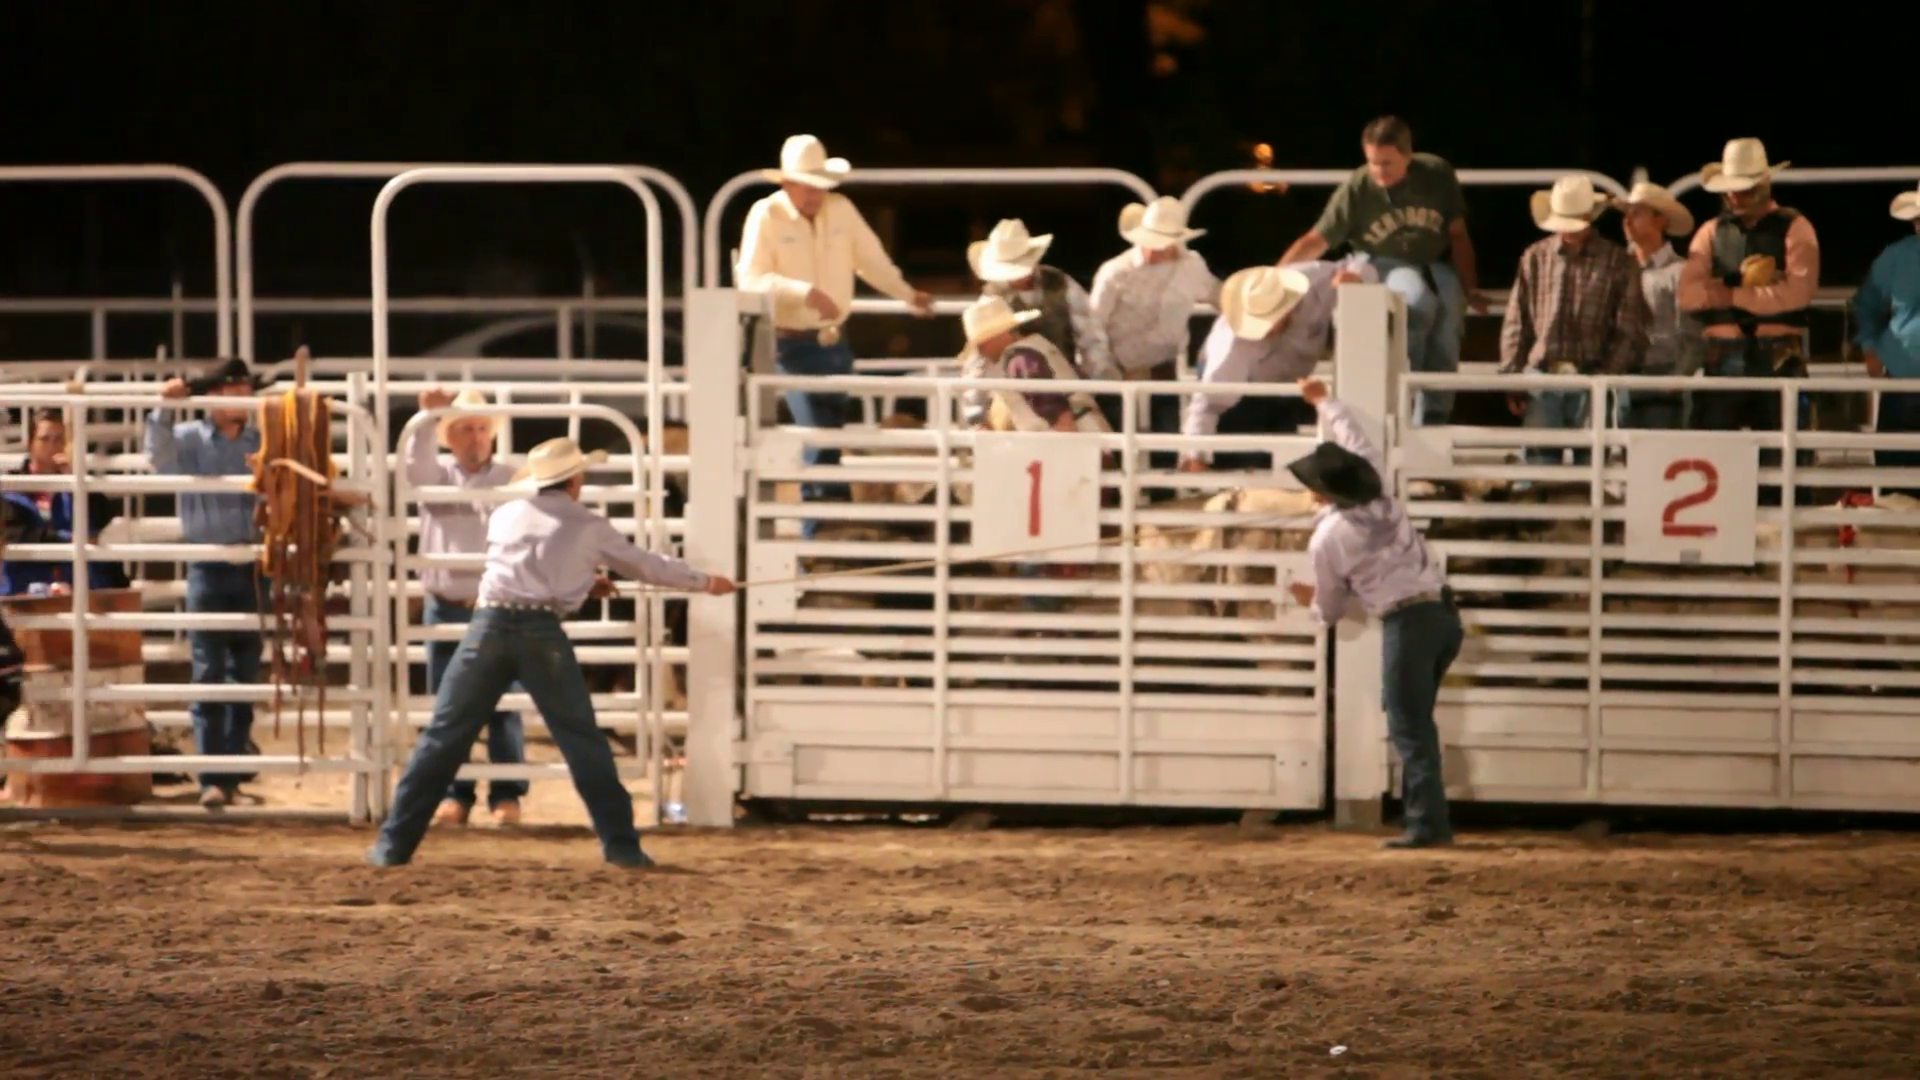 Bull Rider Getting Ready Rodeo At Night P Hd 1013 Stock Video Footage   Videoblocks - Bull Riding, Transparent background PNG HD thumbnail